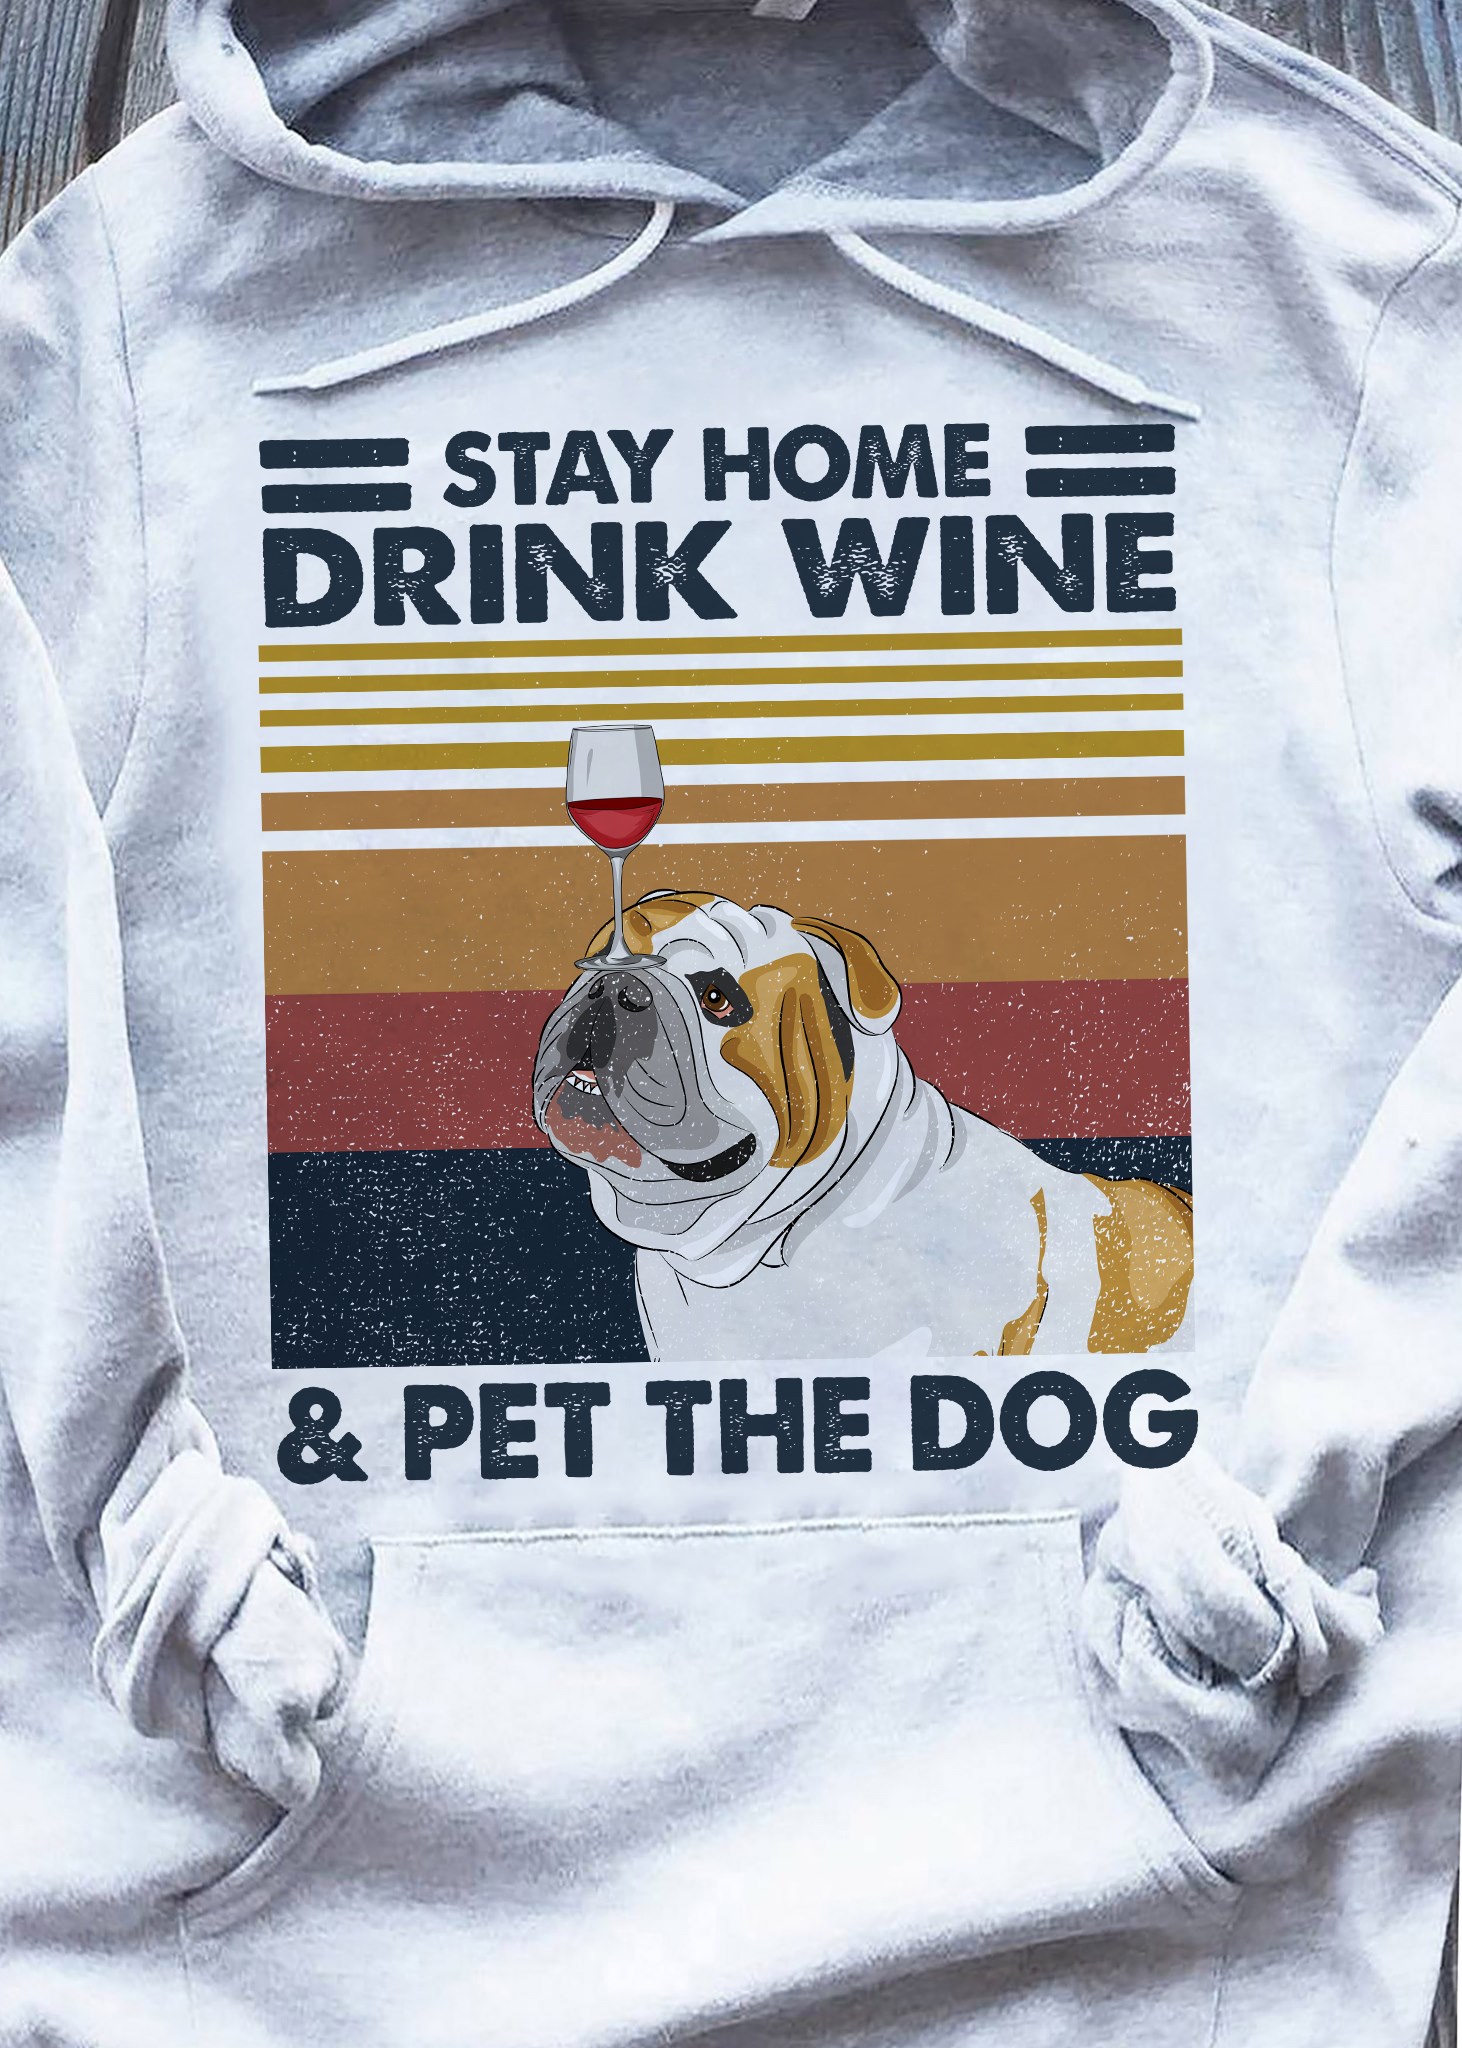 Stay home drink wine and pet the dog - Pug dog and wine lover